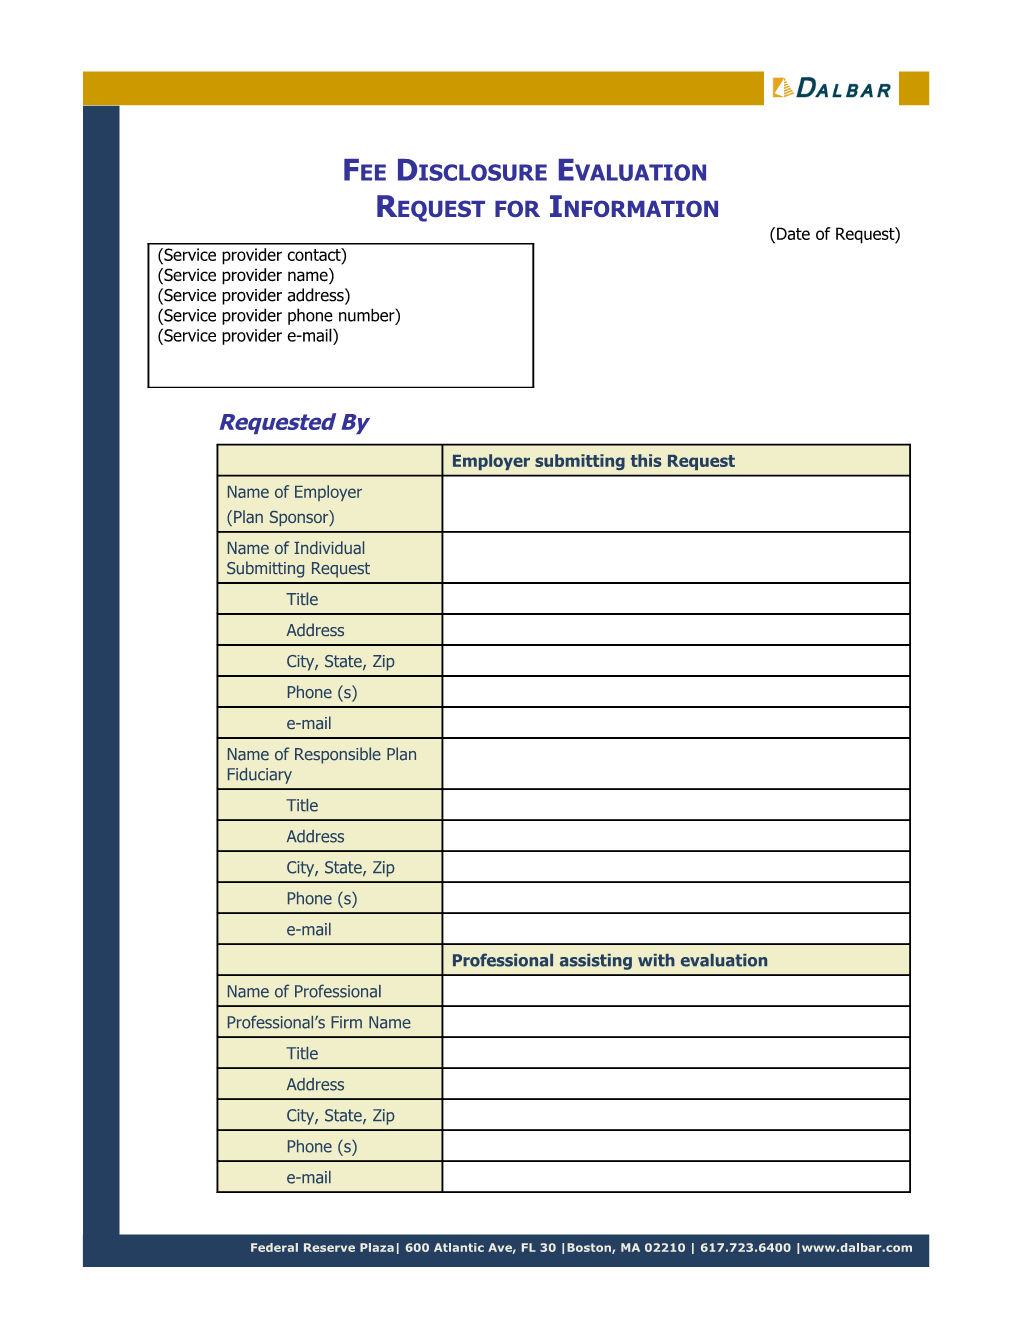 Fee Disclosure Evaluation Request for Information